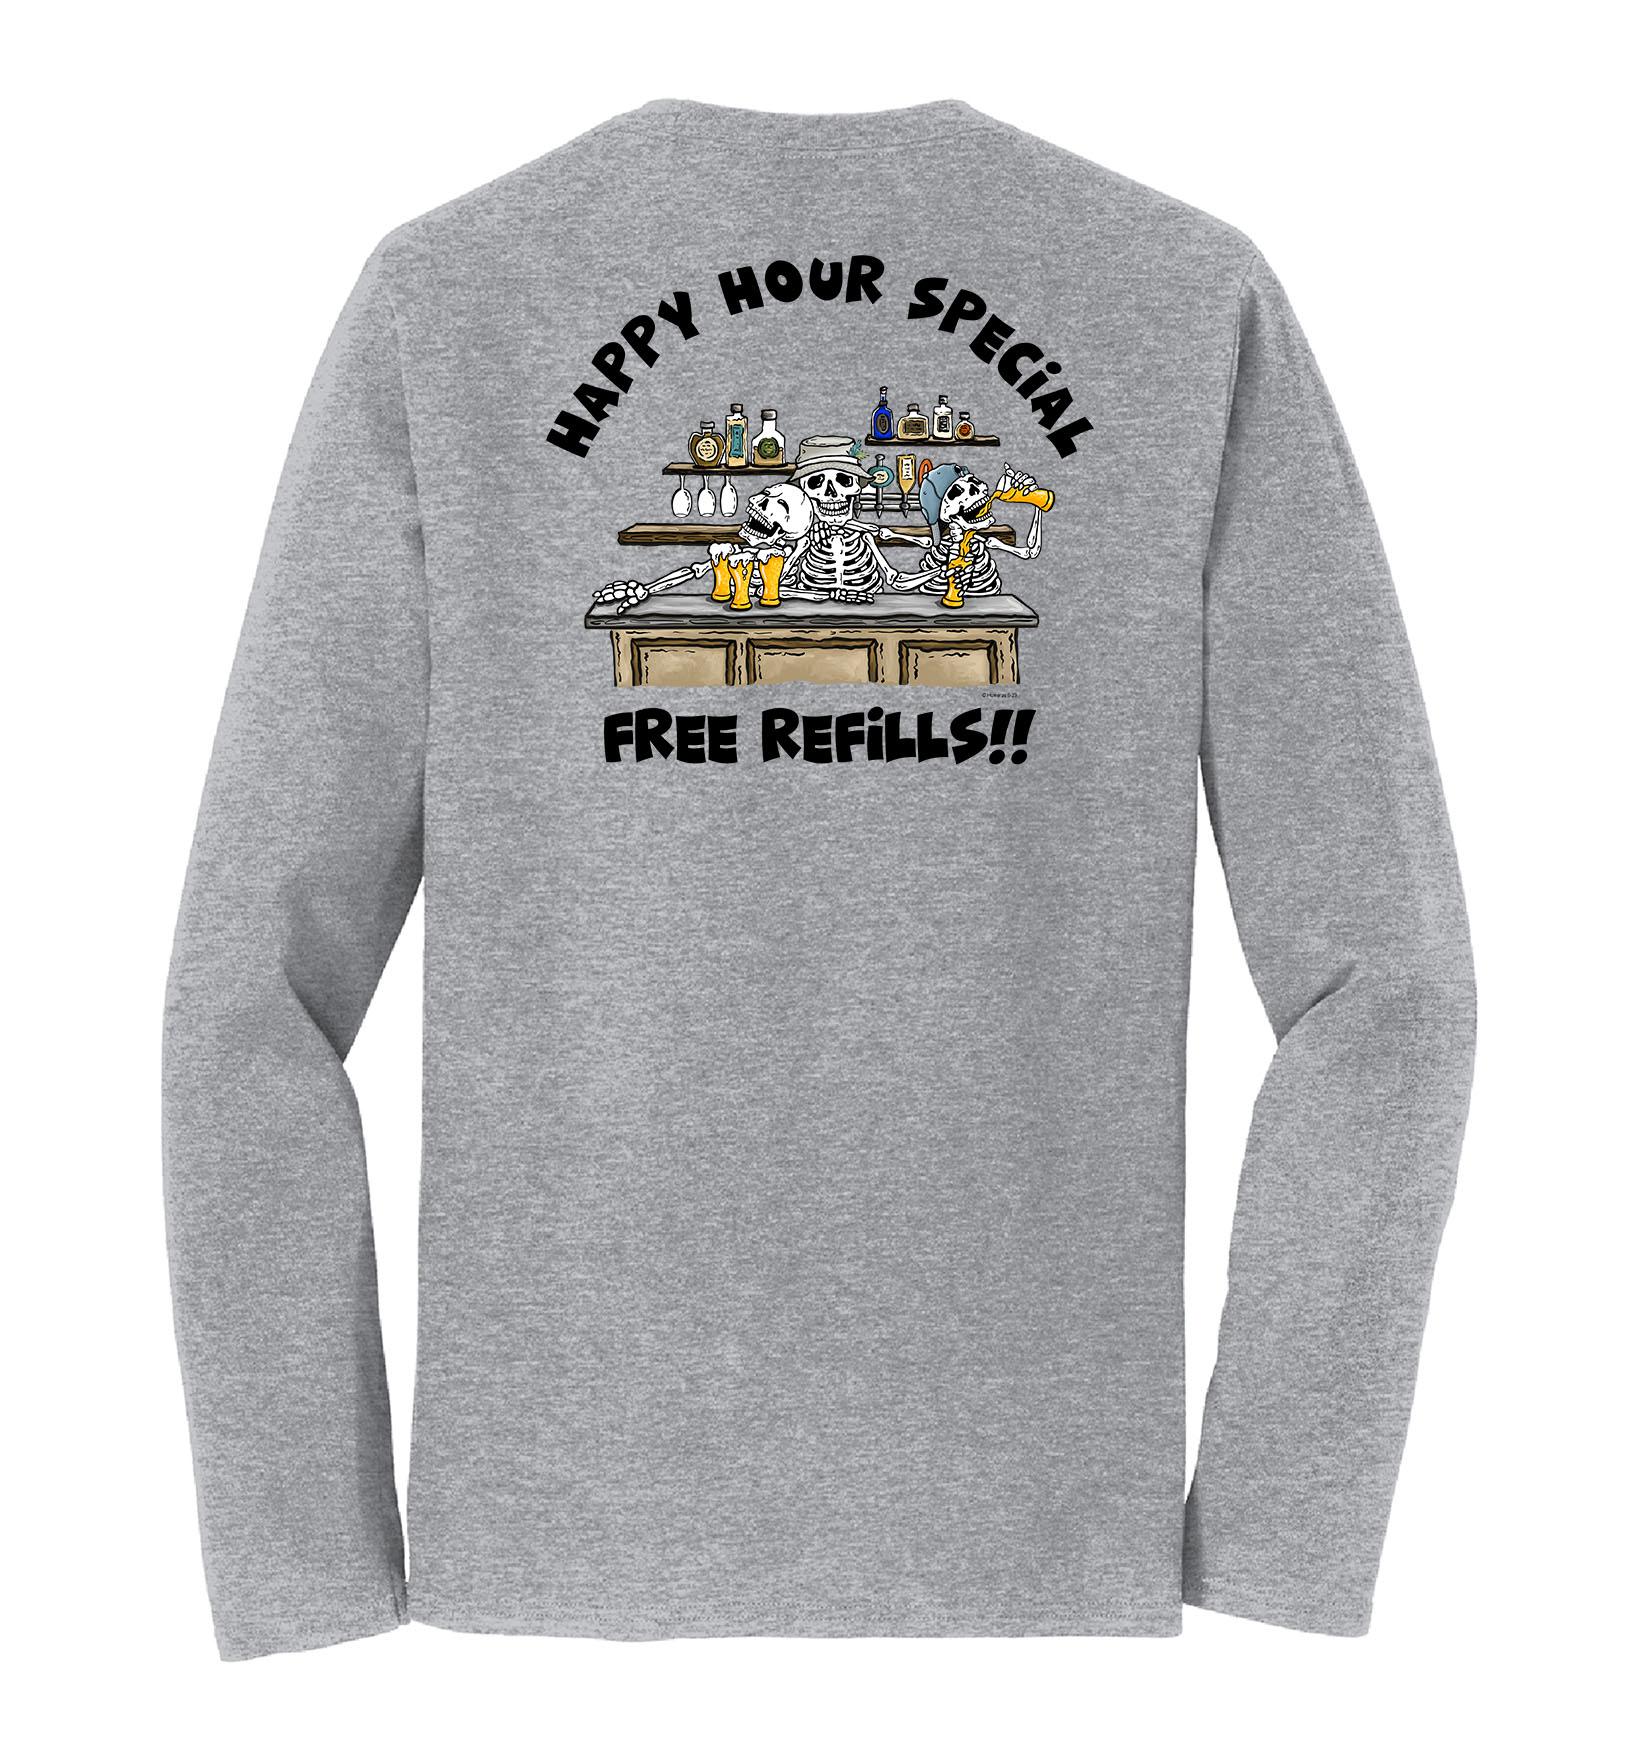 Happy Hour Special - Free Refills - Unisex Long Sleeve T-Shirt